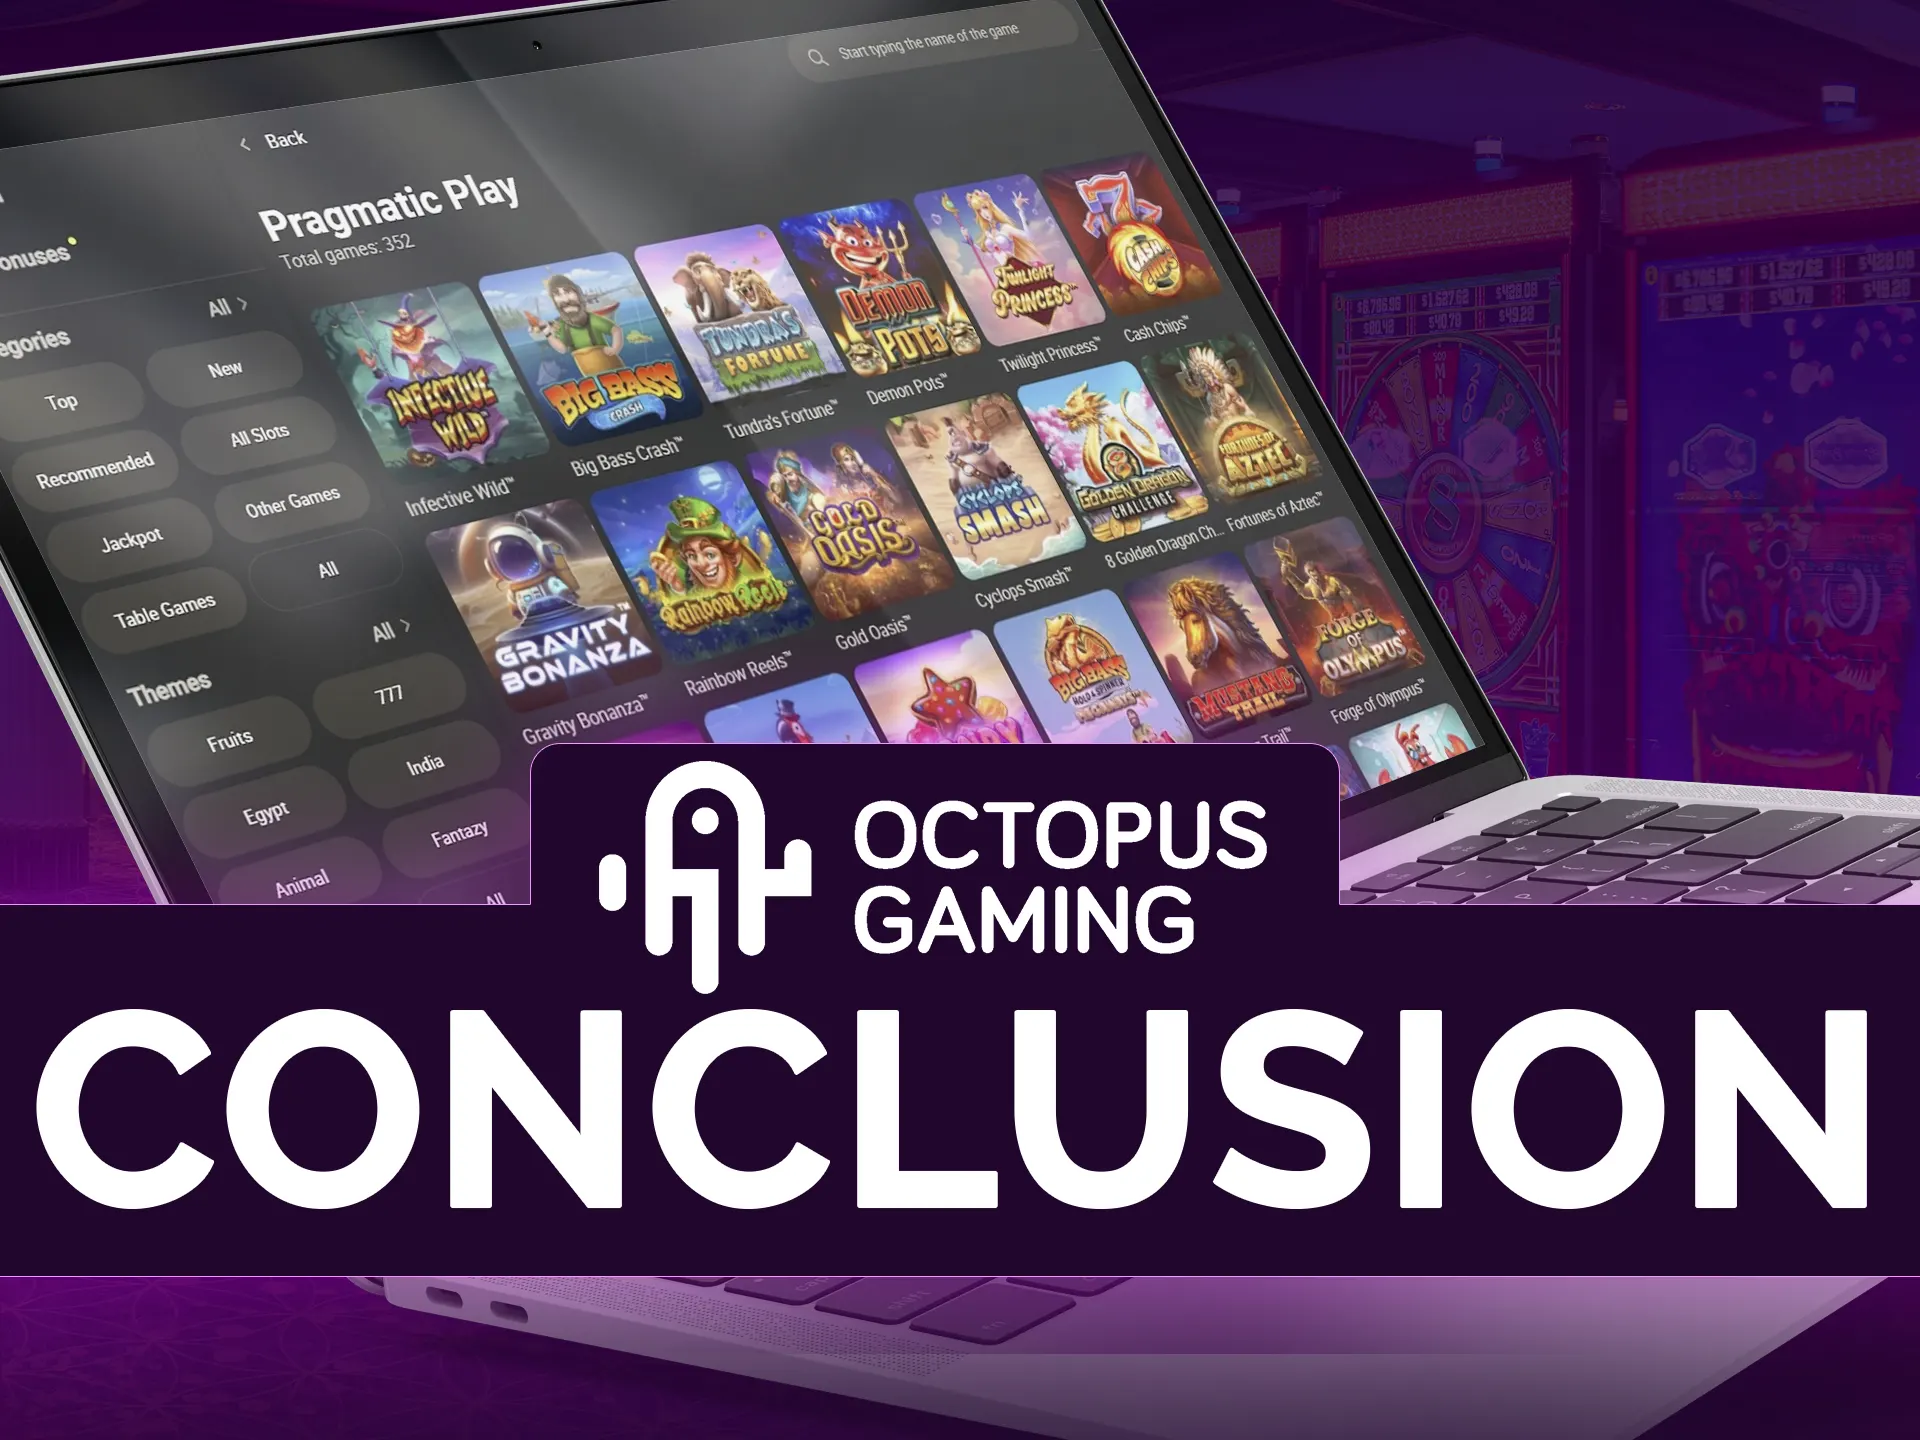 Octopus Gamins is a top-quality provider which offers diverse games, unique plots, and designs.